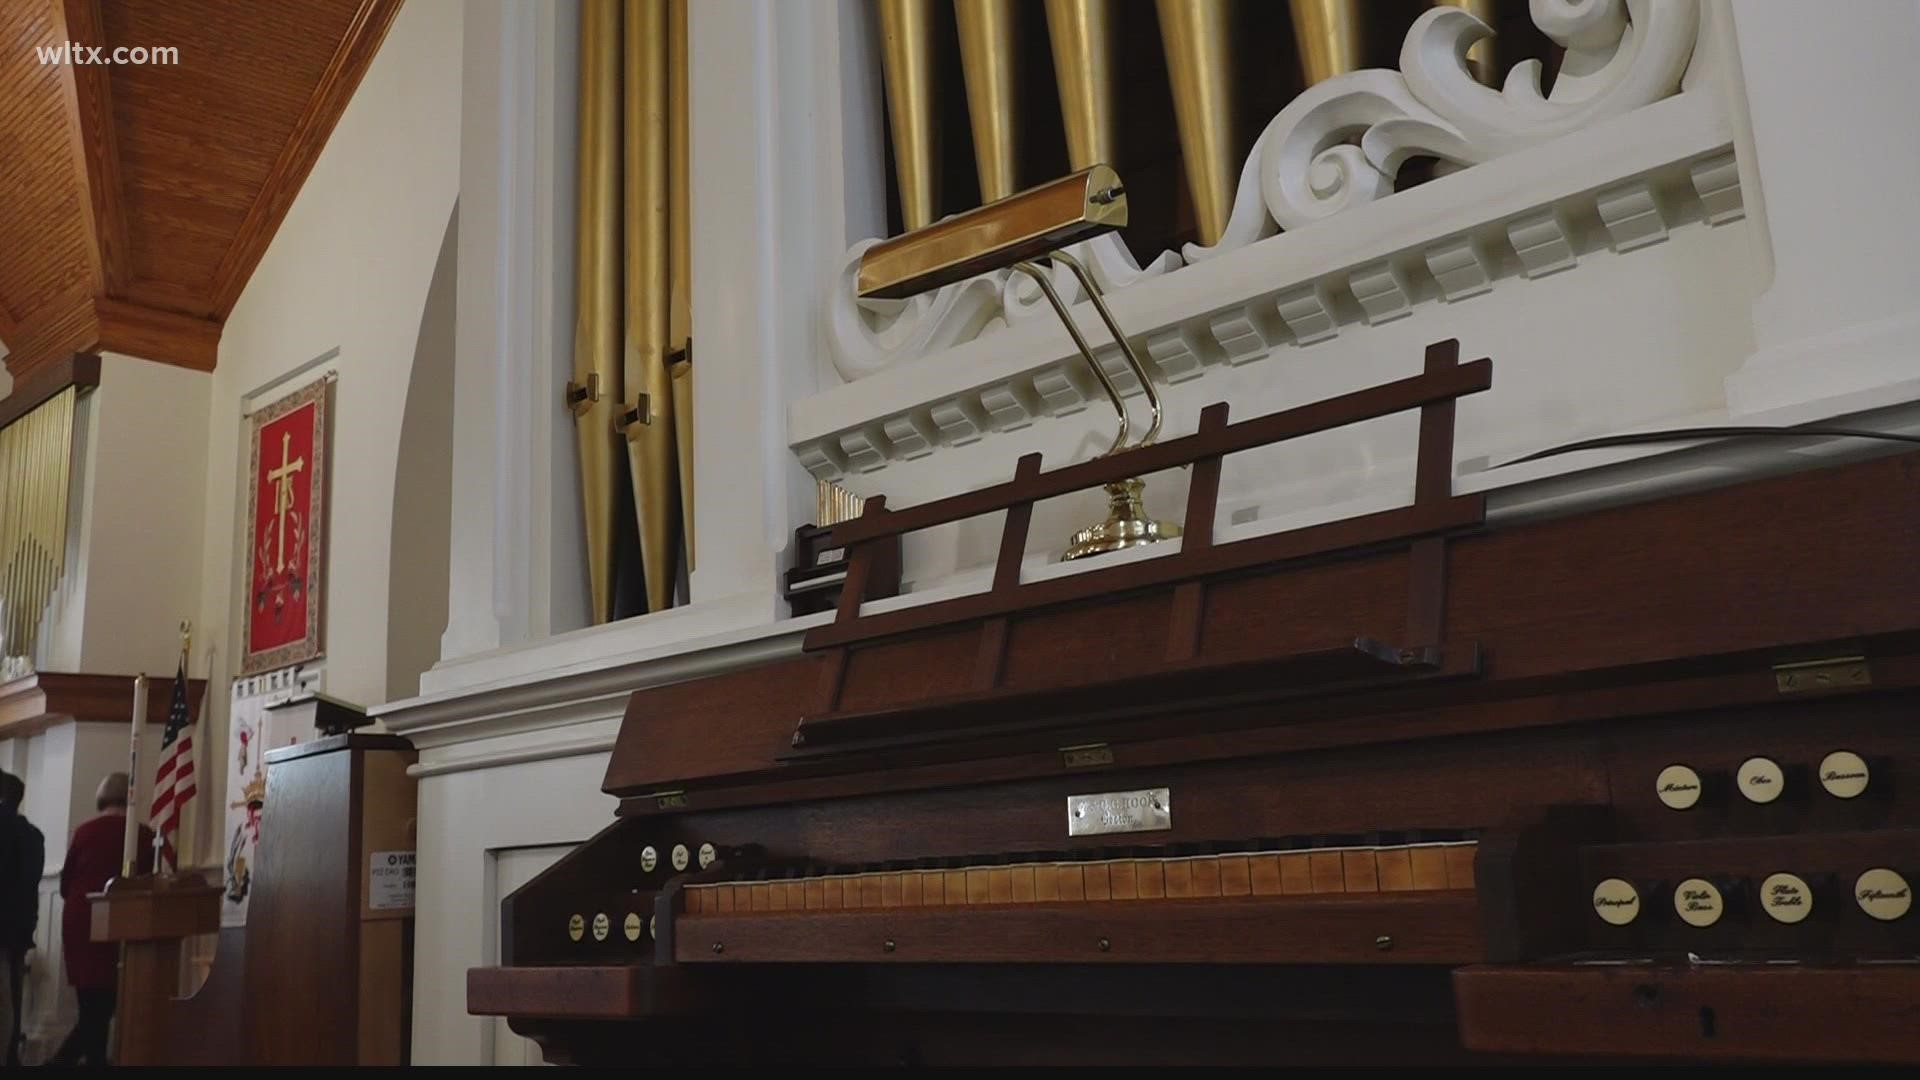 With over a century-and-a-half of history behind it, this organ could change the way an Irmo-area church makes a joyful noise.